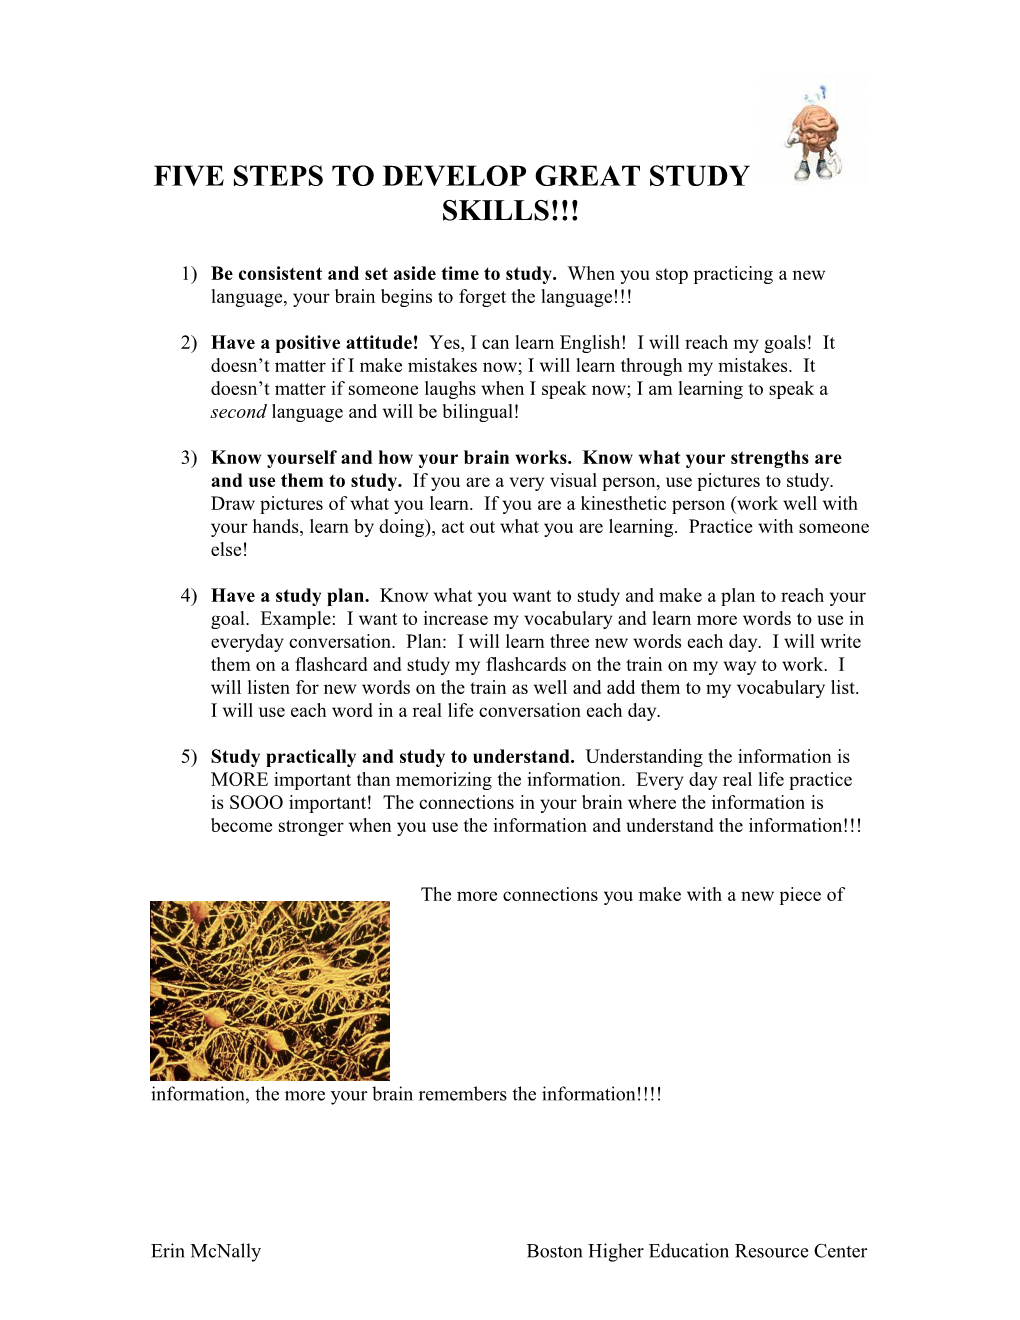 Five Steps to Develop Great Study Skills